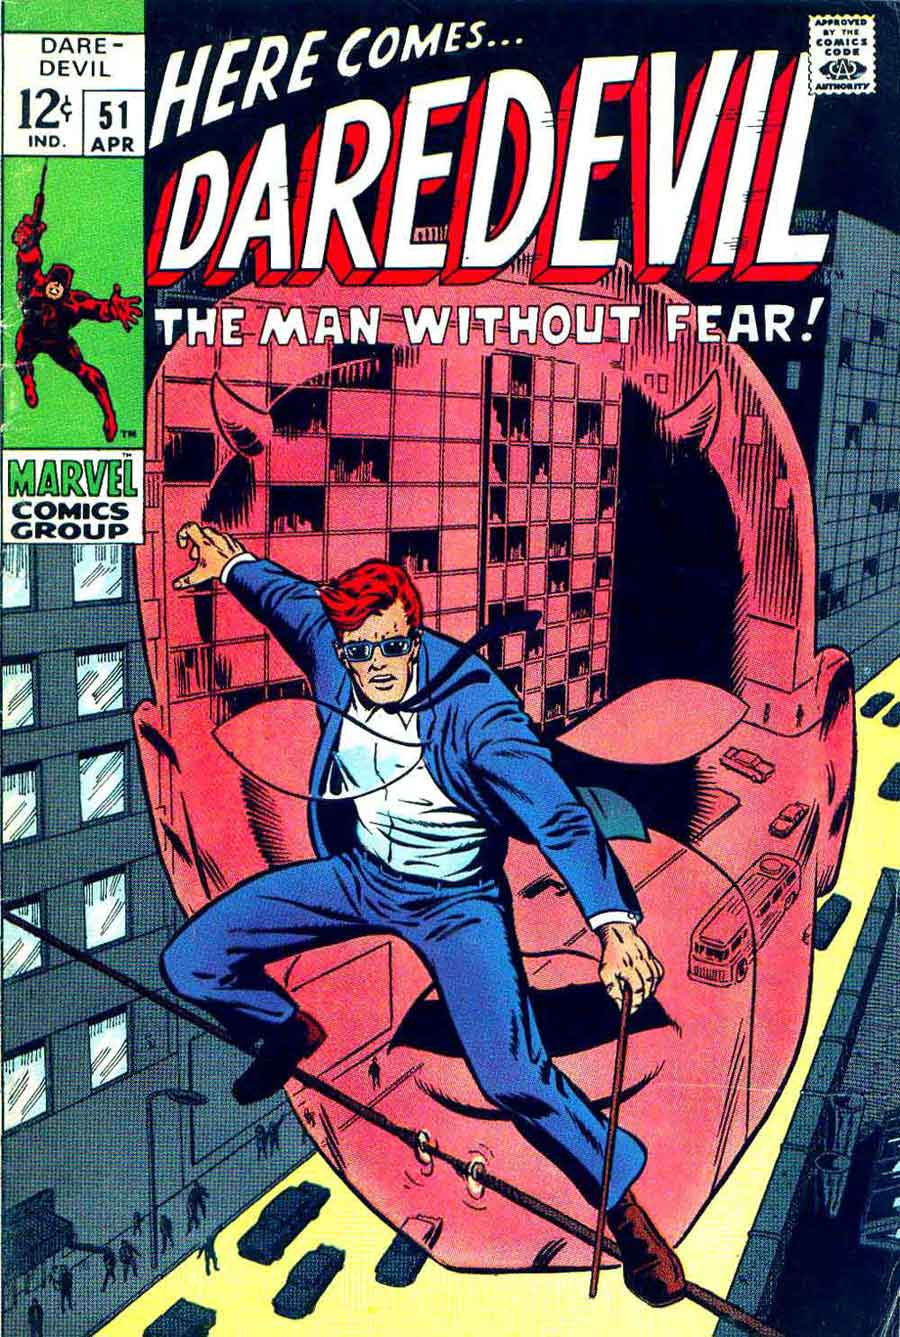 Daredevil v1 #51 marvel 1960s silver age comic book cover art by Barry Windsor Smith